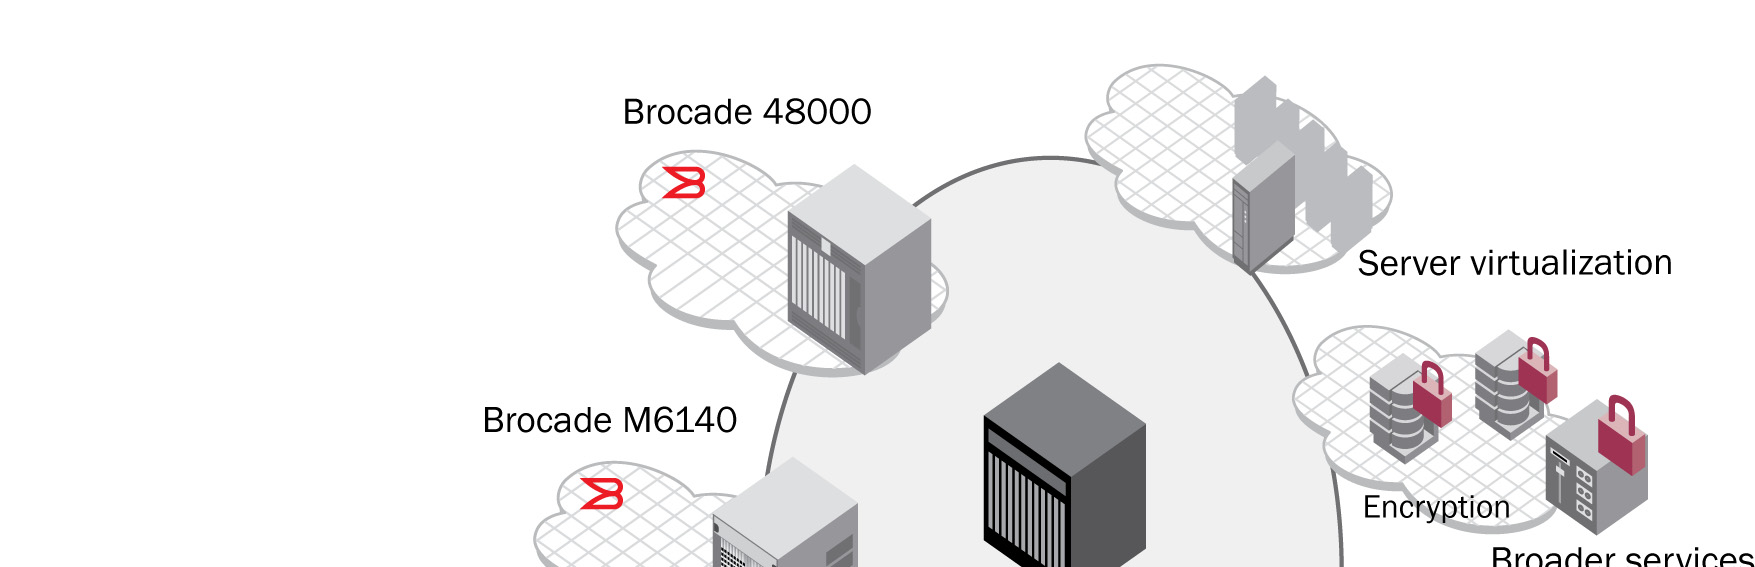 The Brocade DCX Backbone is the building block for converging server-to-server, server-to-storage, and storage-to-storage connectivity, which integrates with virtual server and